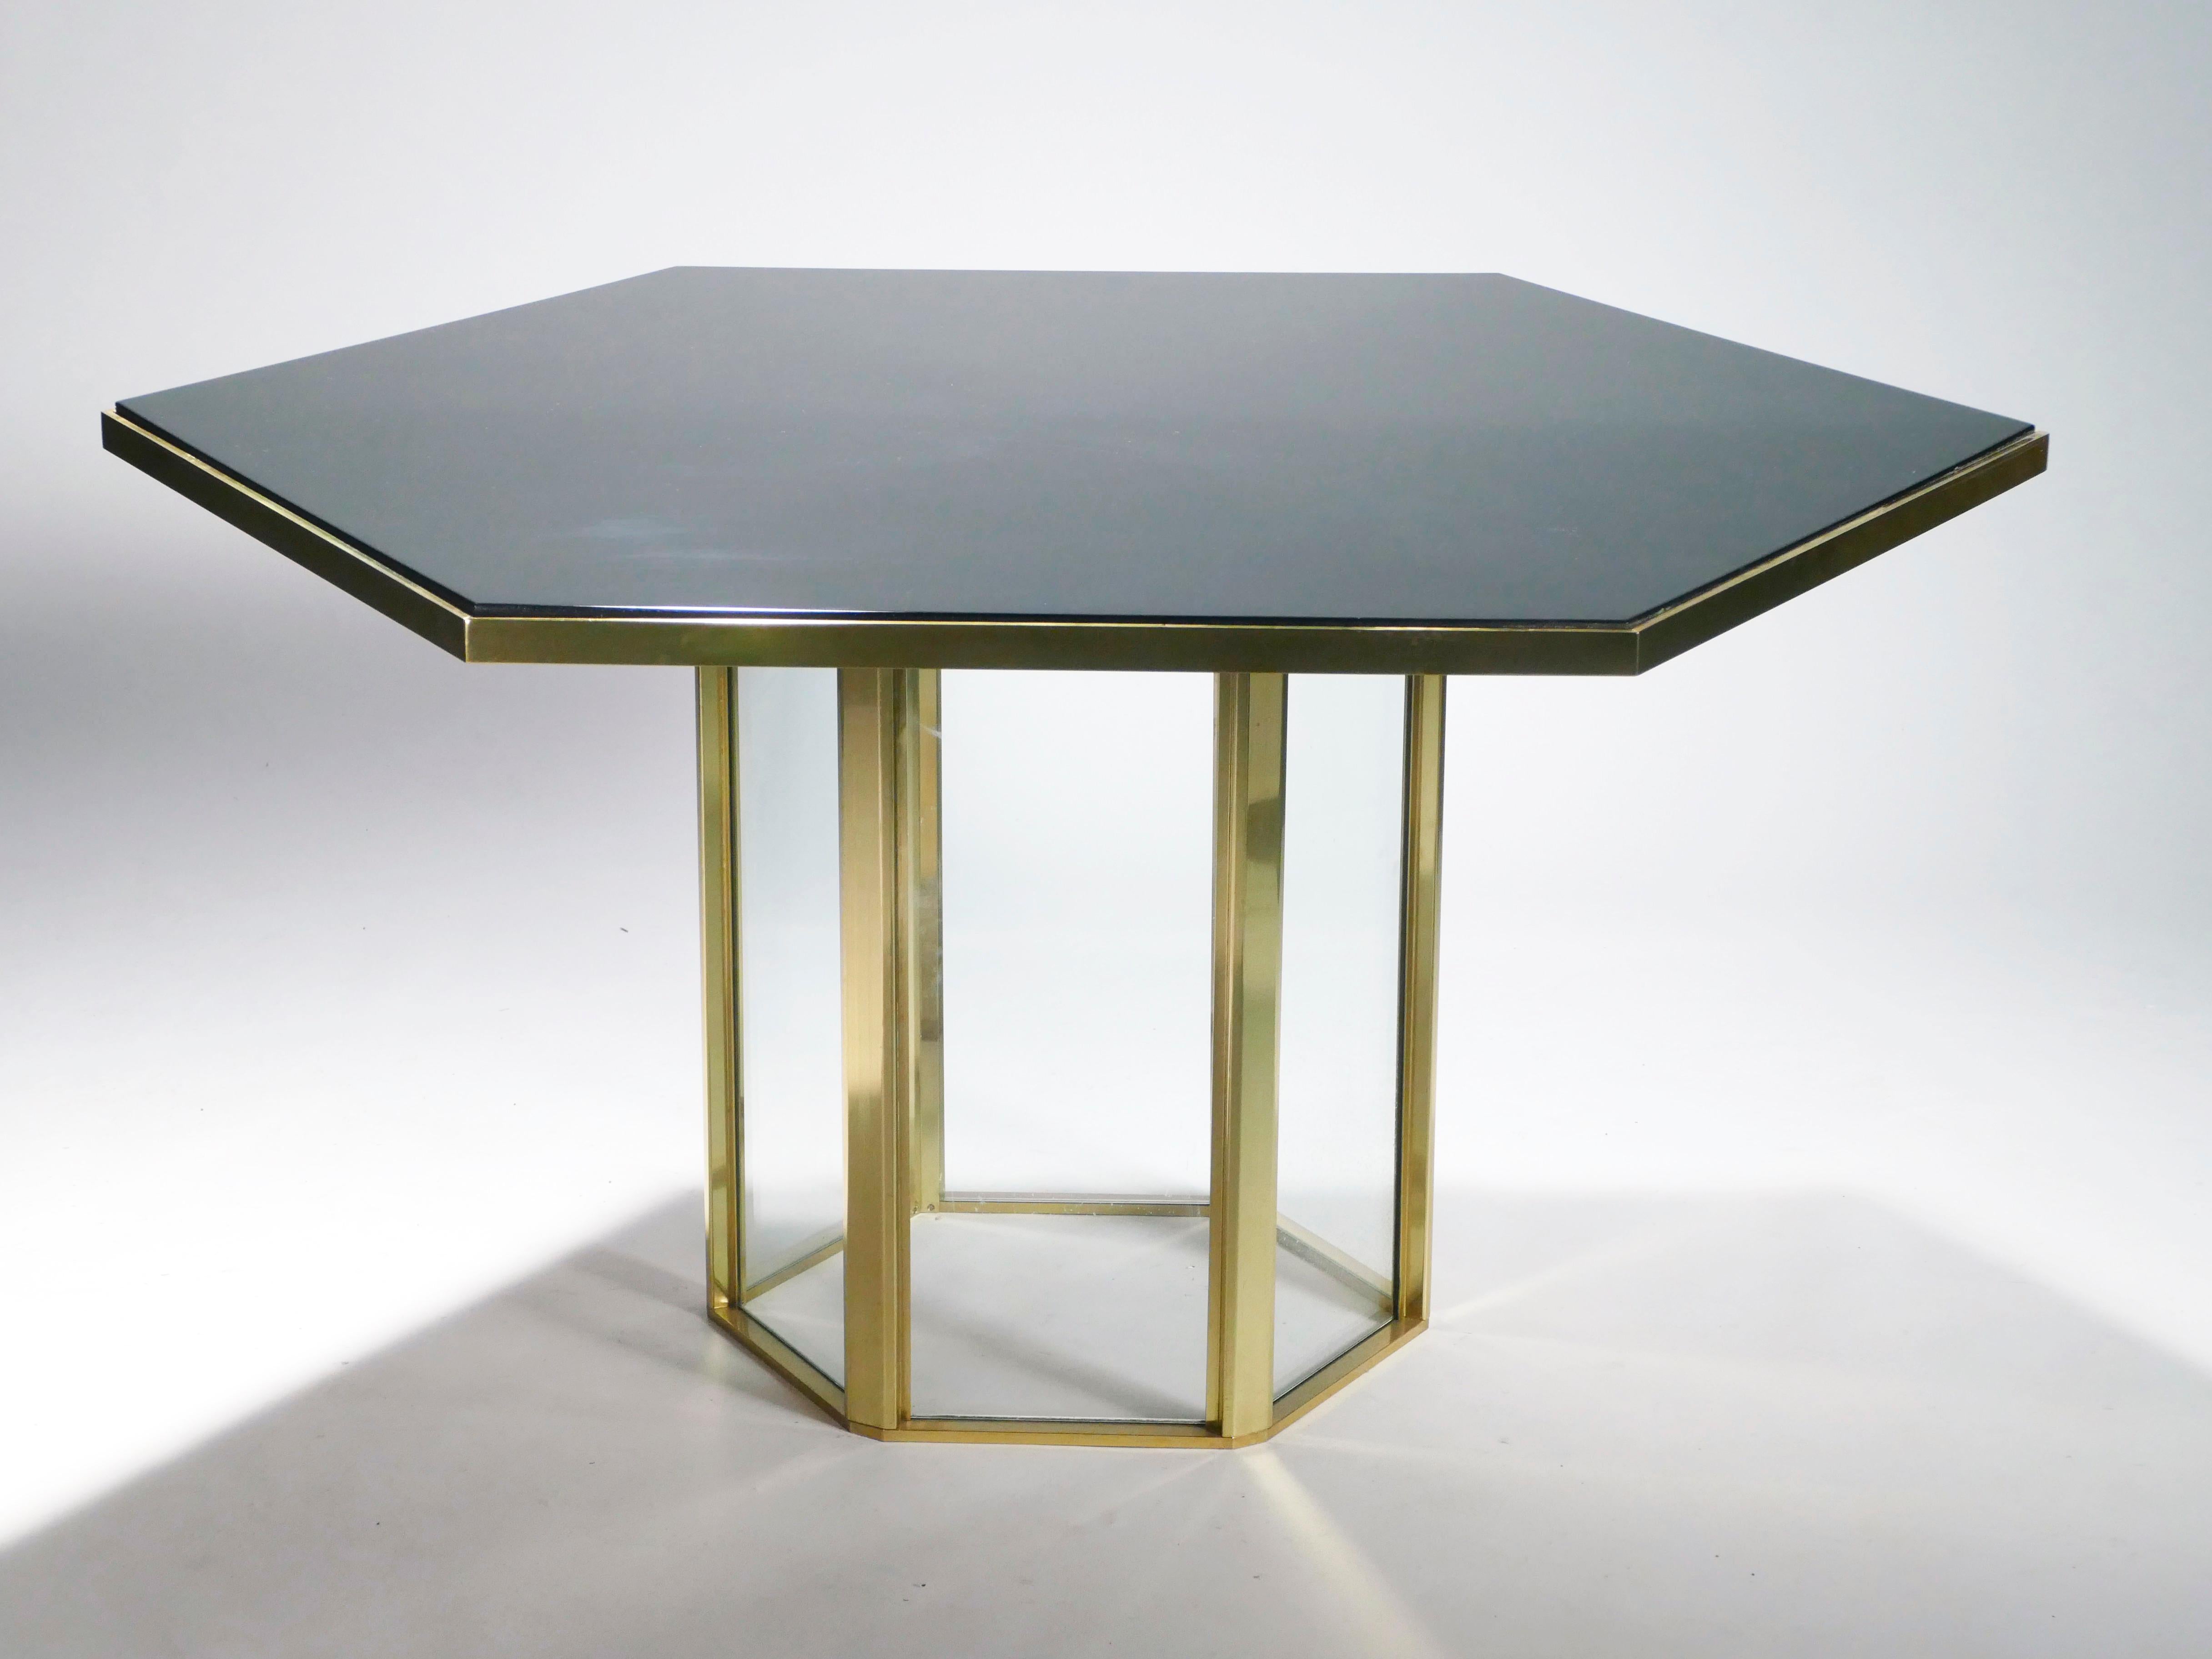 Luxe and inventive, this midcentury dining table by Romeo Rega for Metalarte has been maintained in very good vintage condition. It’s the black lacquer top that makes this midcentury table feel as glamorous as it does, with its impossibly smooth,